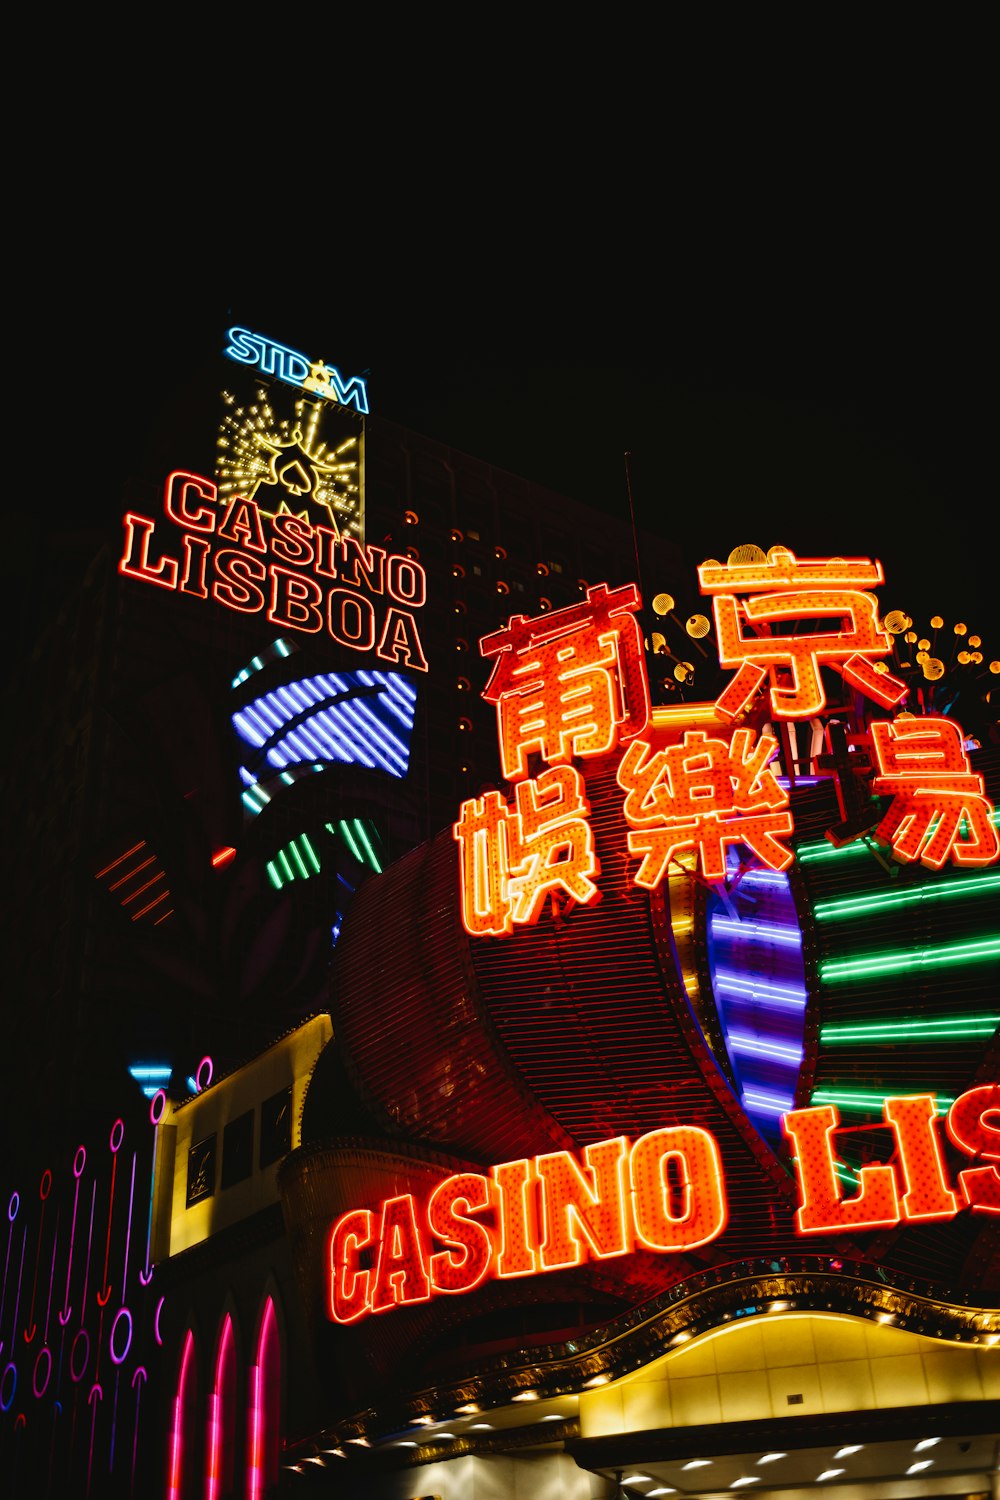 a casino sign lit up at night with neon lights